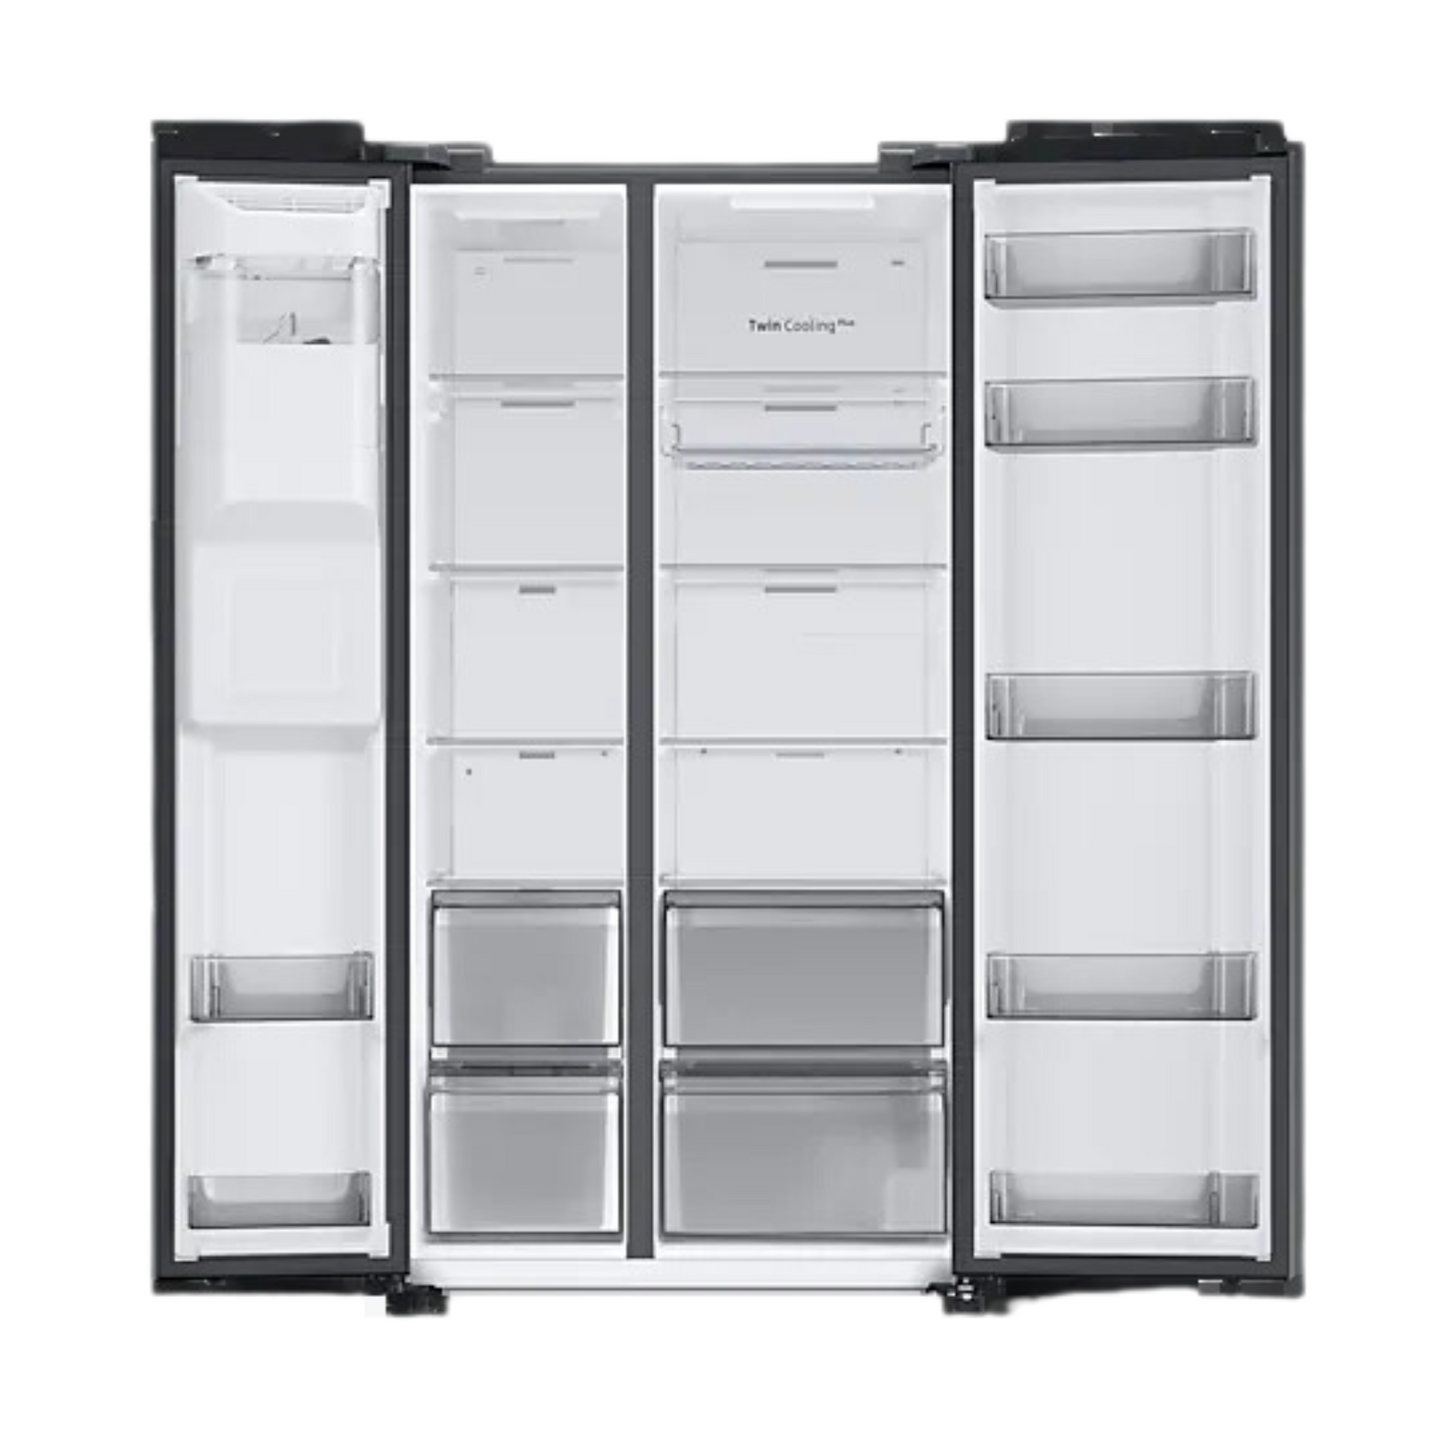 Samsung 634L Metal Cooling Side by Side Refrigerator, RS68A8842S9